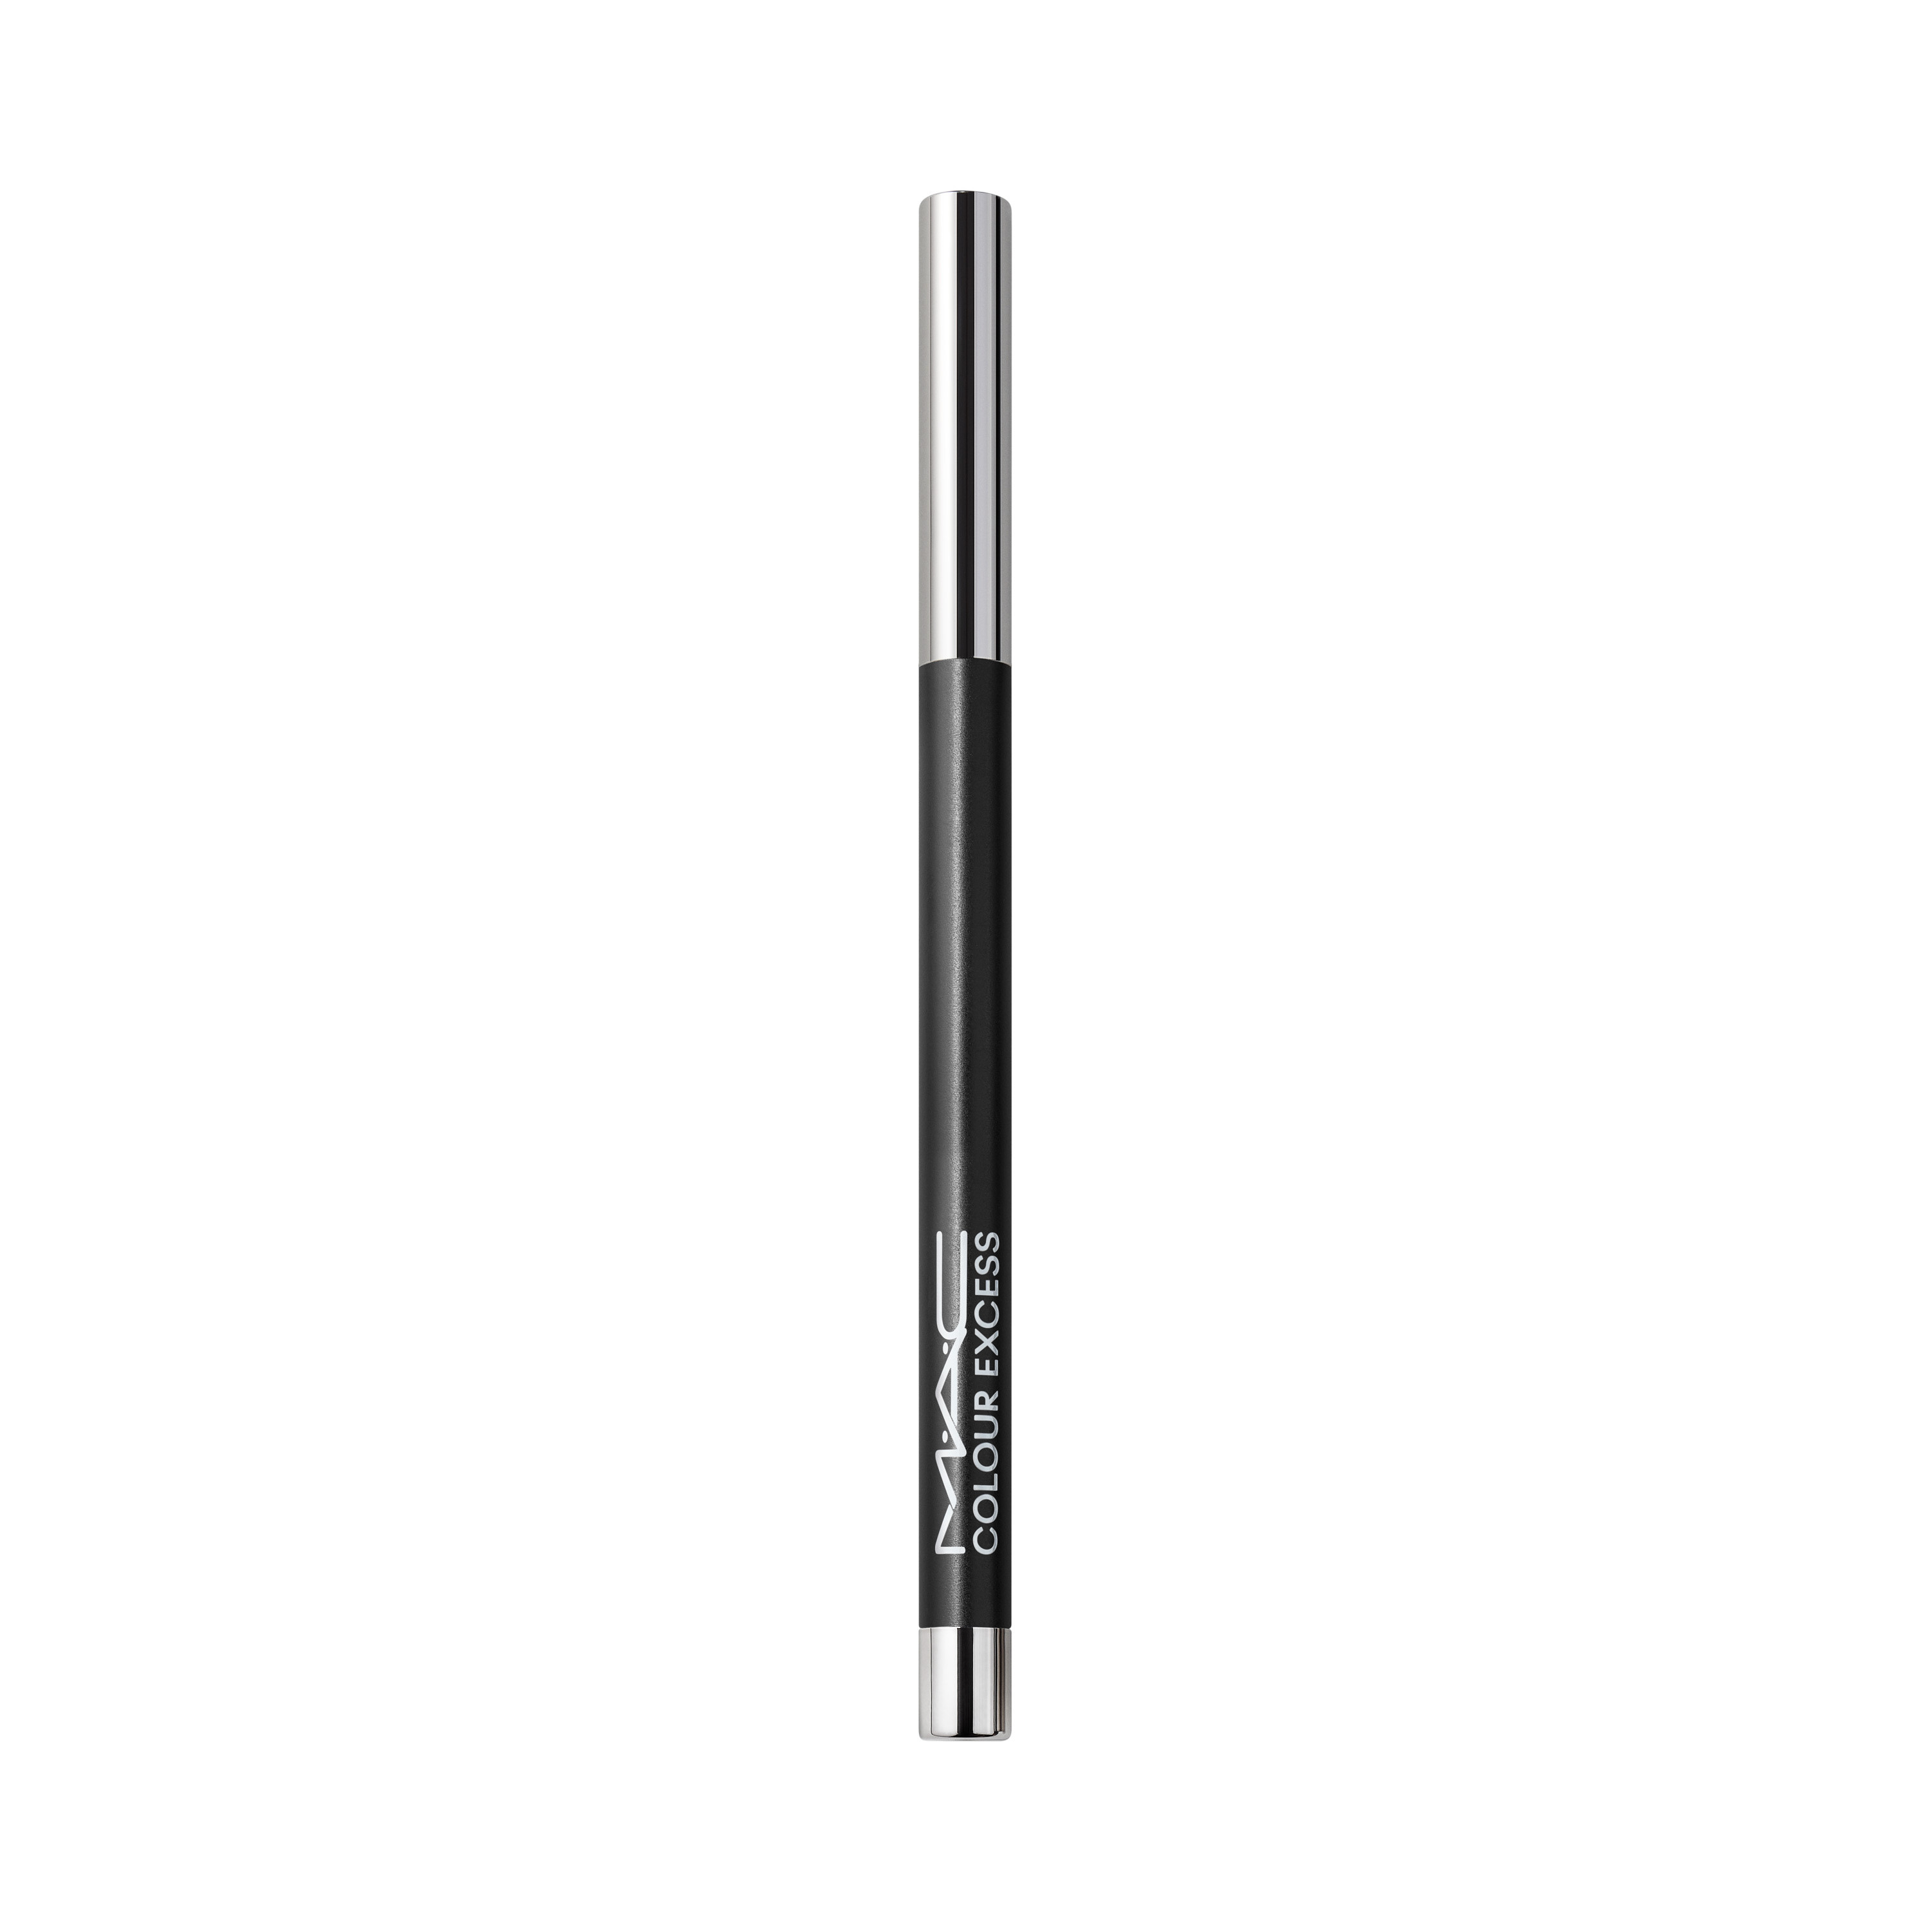 MICHELE MAGNANI SELECTION - Colour Excess Gel Liner-Glide Or Die, Nero, large image number 2